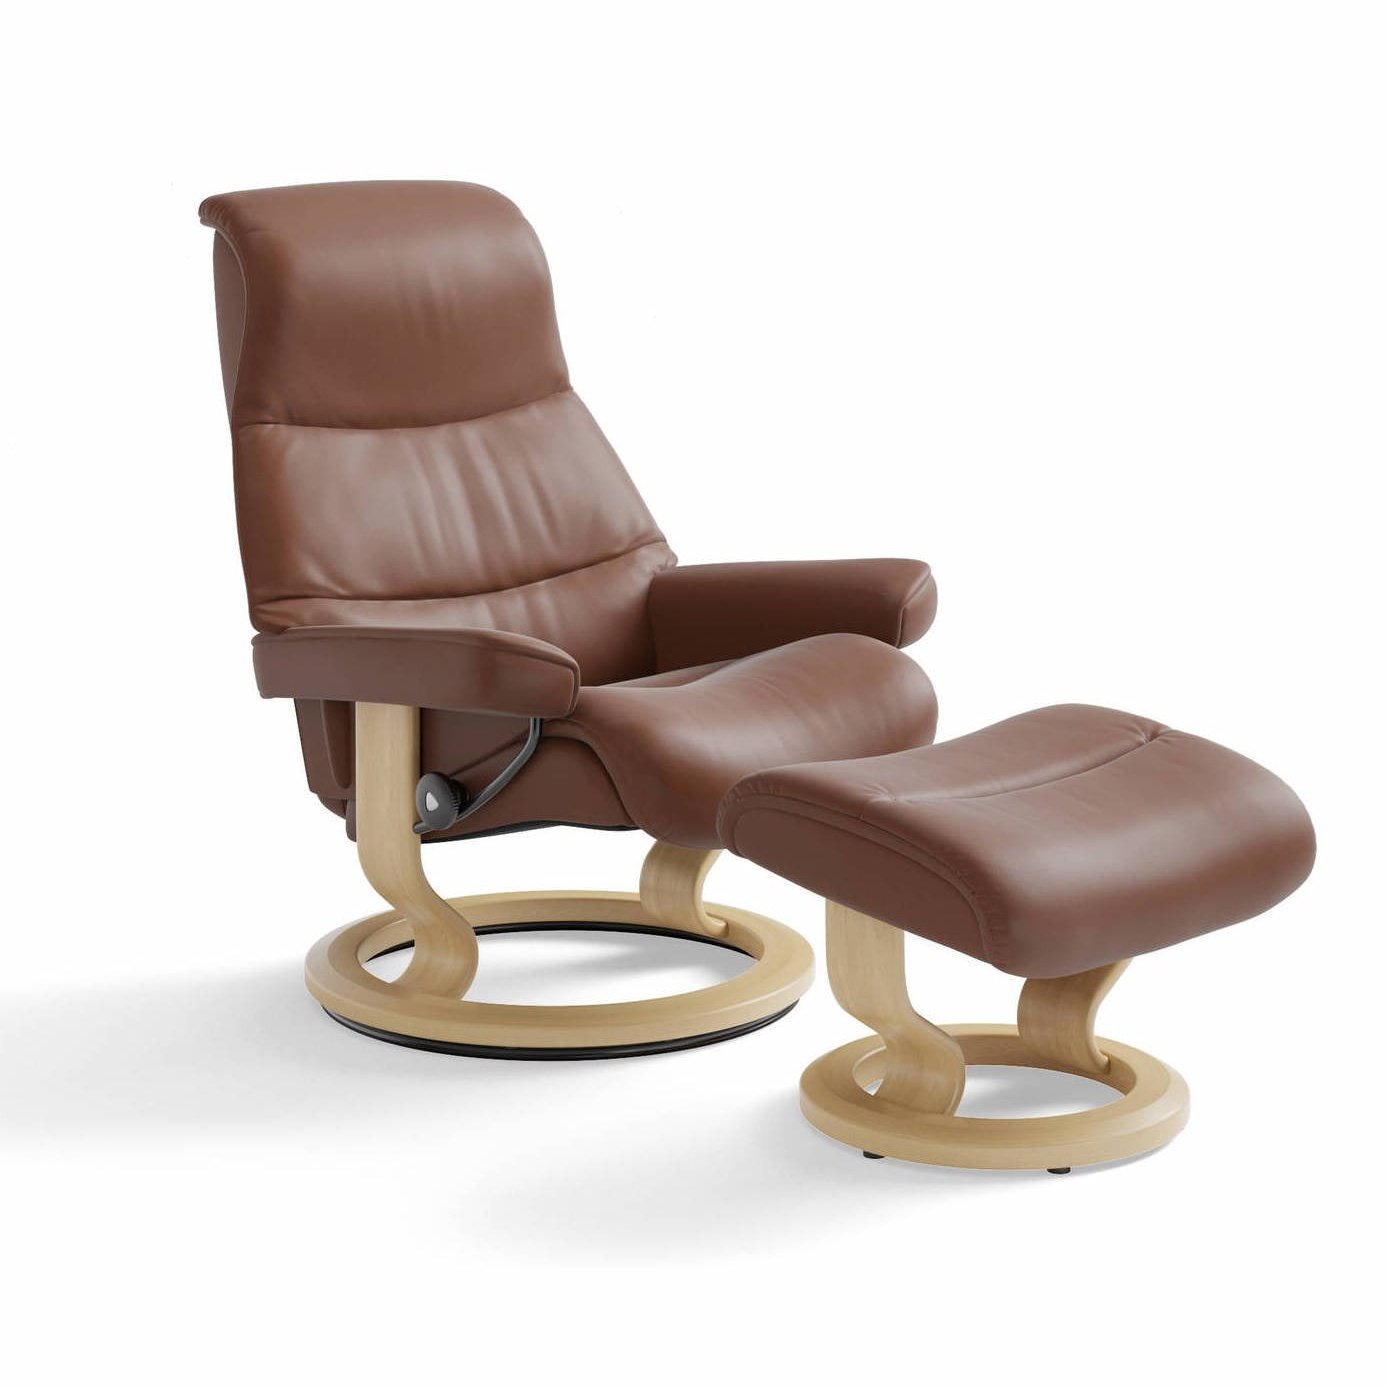 Stressless View Medium Recliner with Footstool